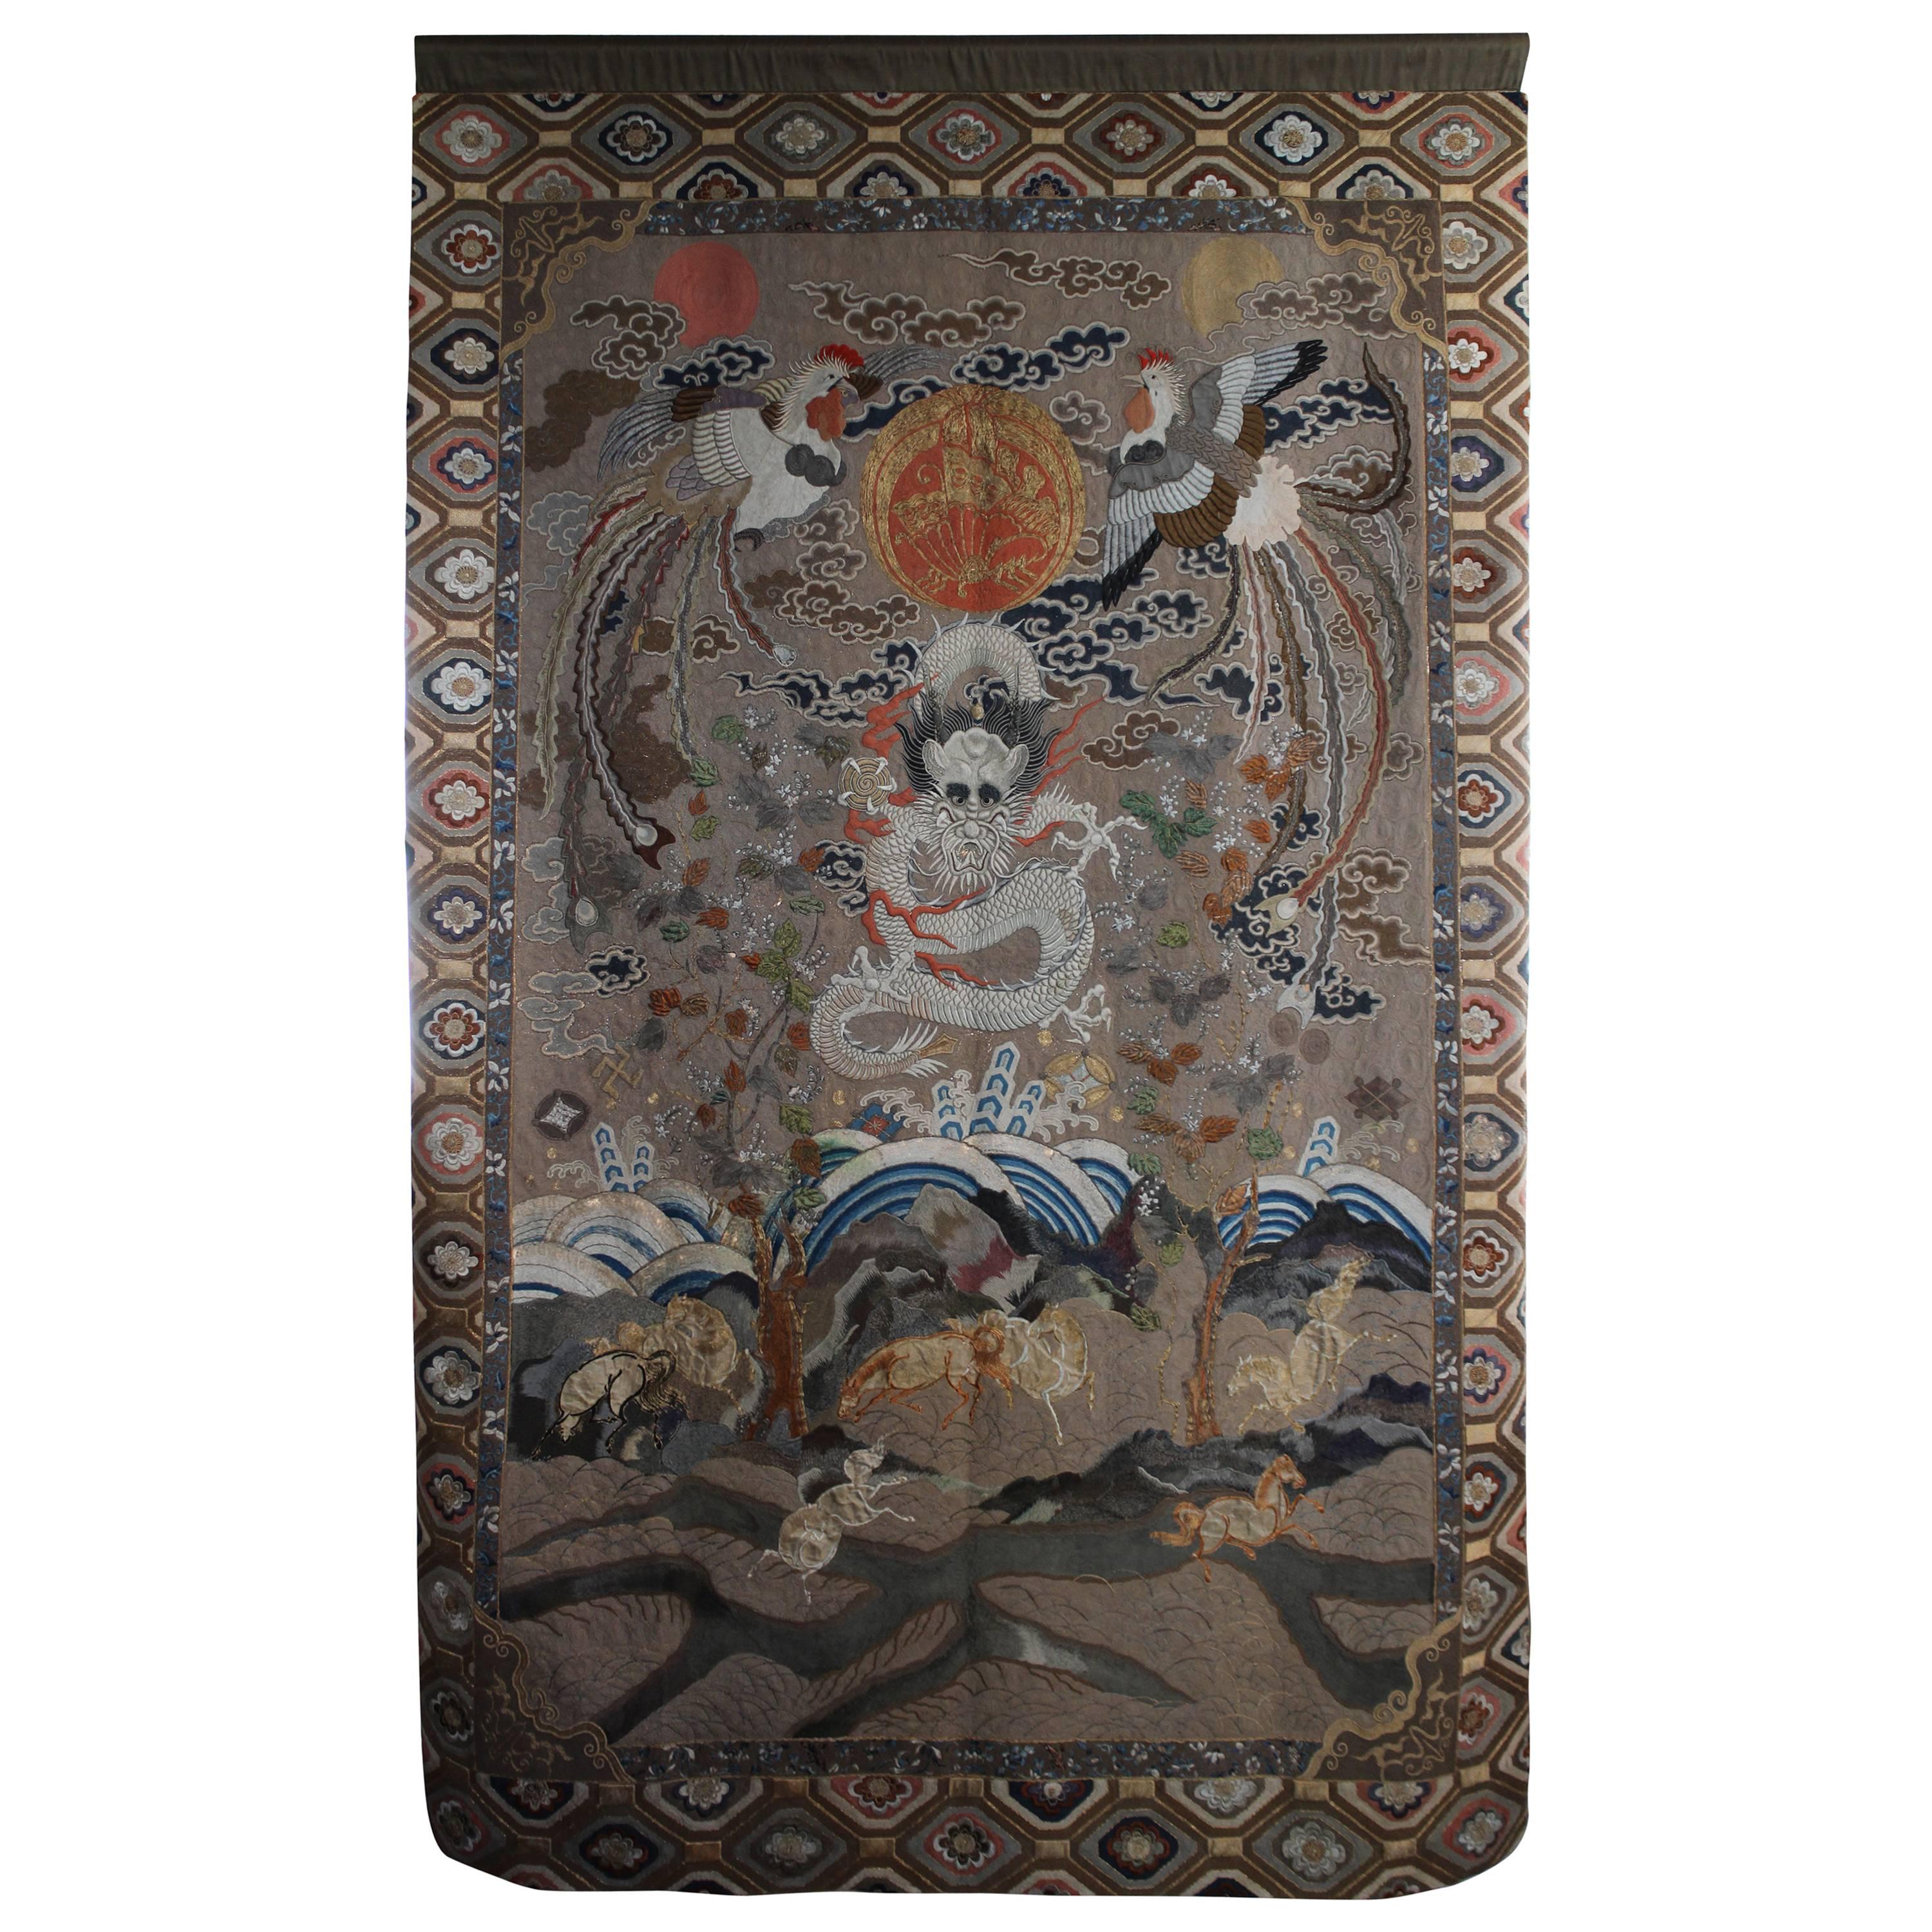 Impressive Antique Japanese Silk Wall Hanging of a Chinese Imperial Dragon